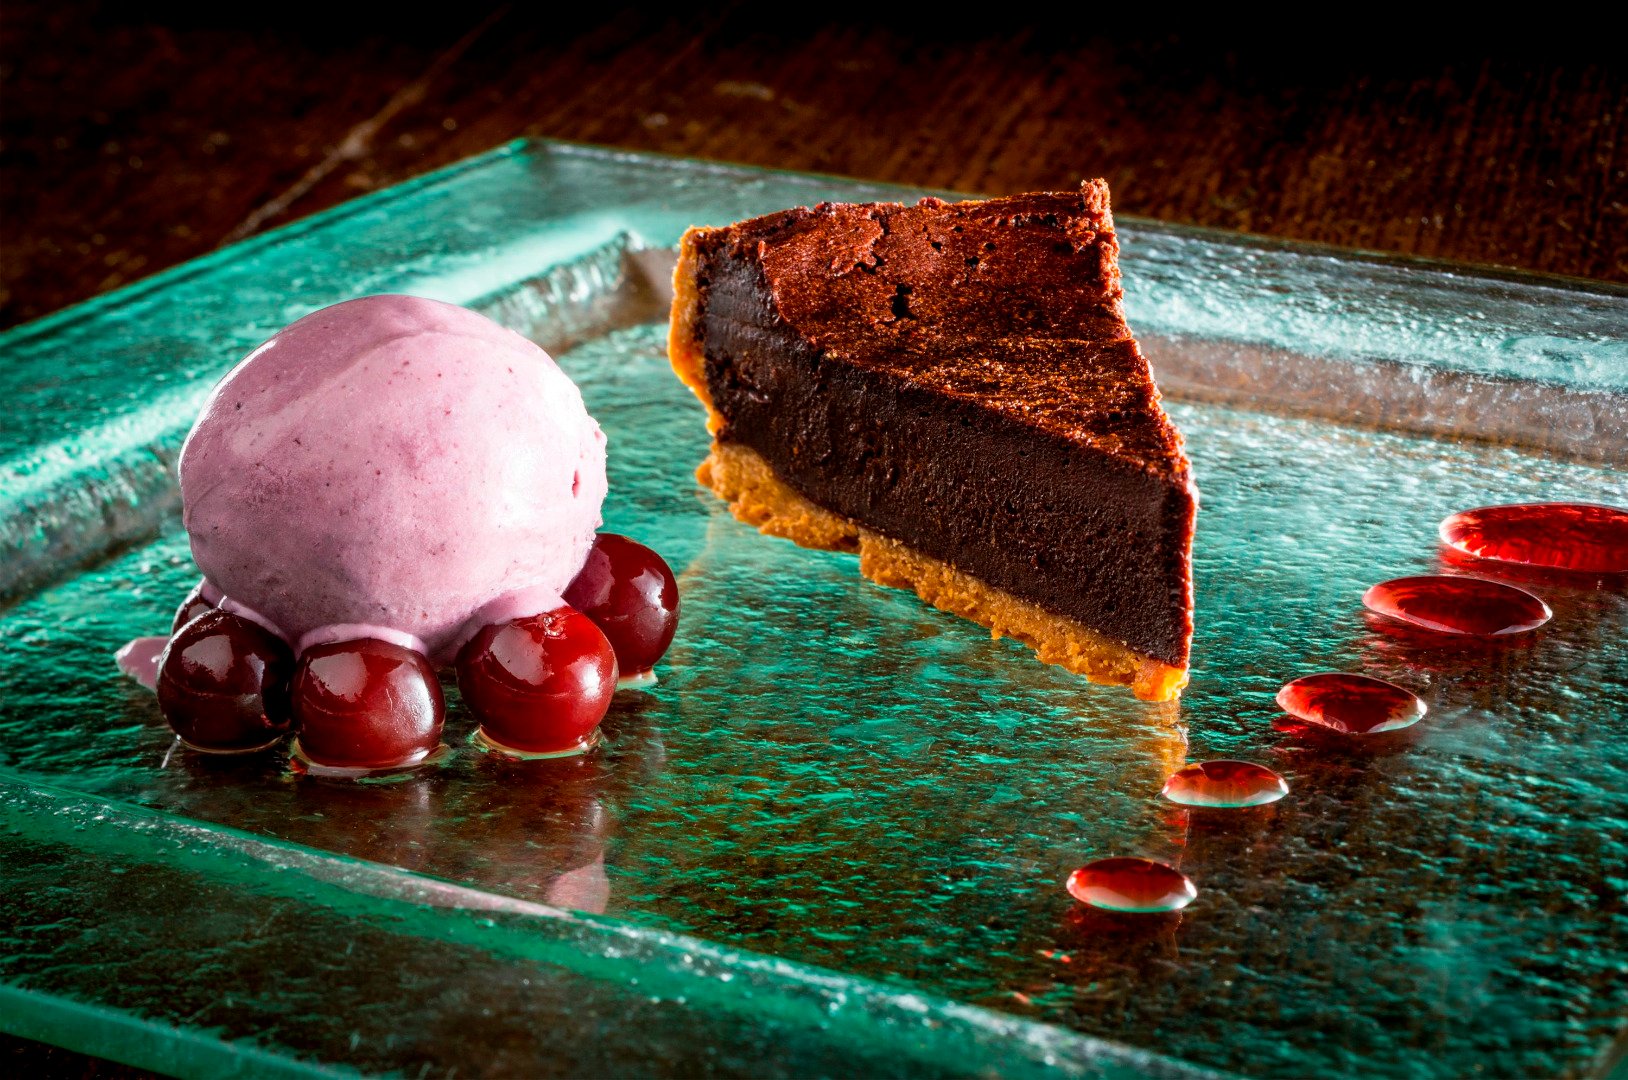 Image name homemade chocolate tart with cherry ice cream cherries the blue lion inn east witton the good pub guide inn of the year 20141 the 26 image from the post Eating out in the Yorkshire Dales in Yorkshire.com.